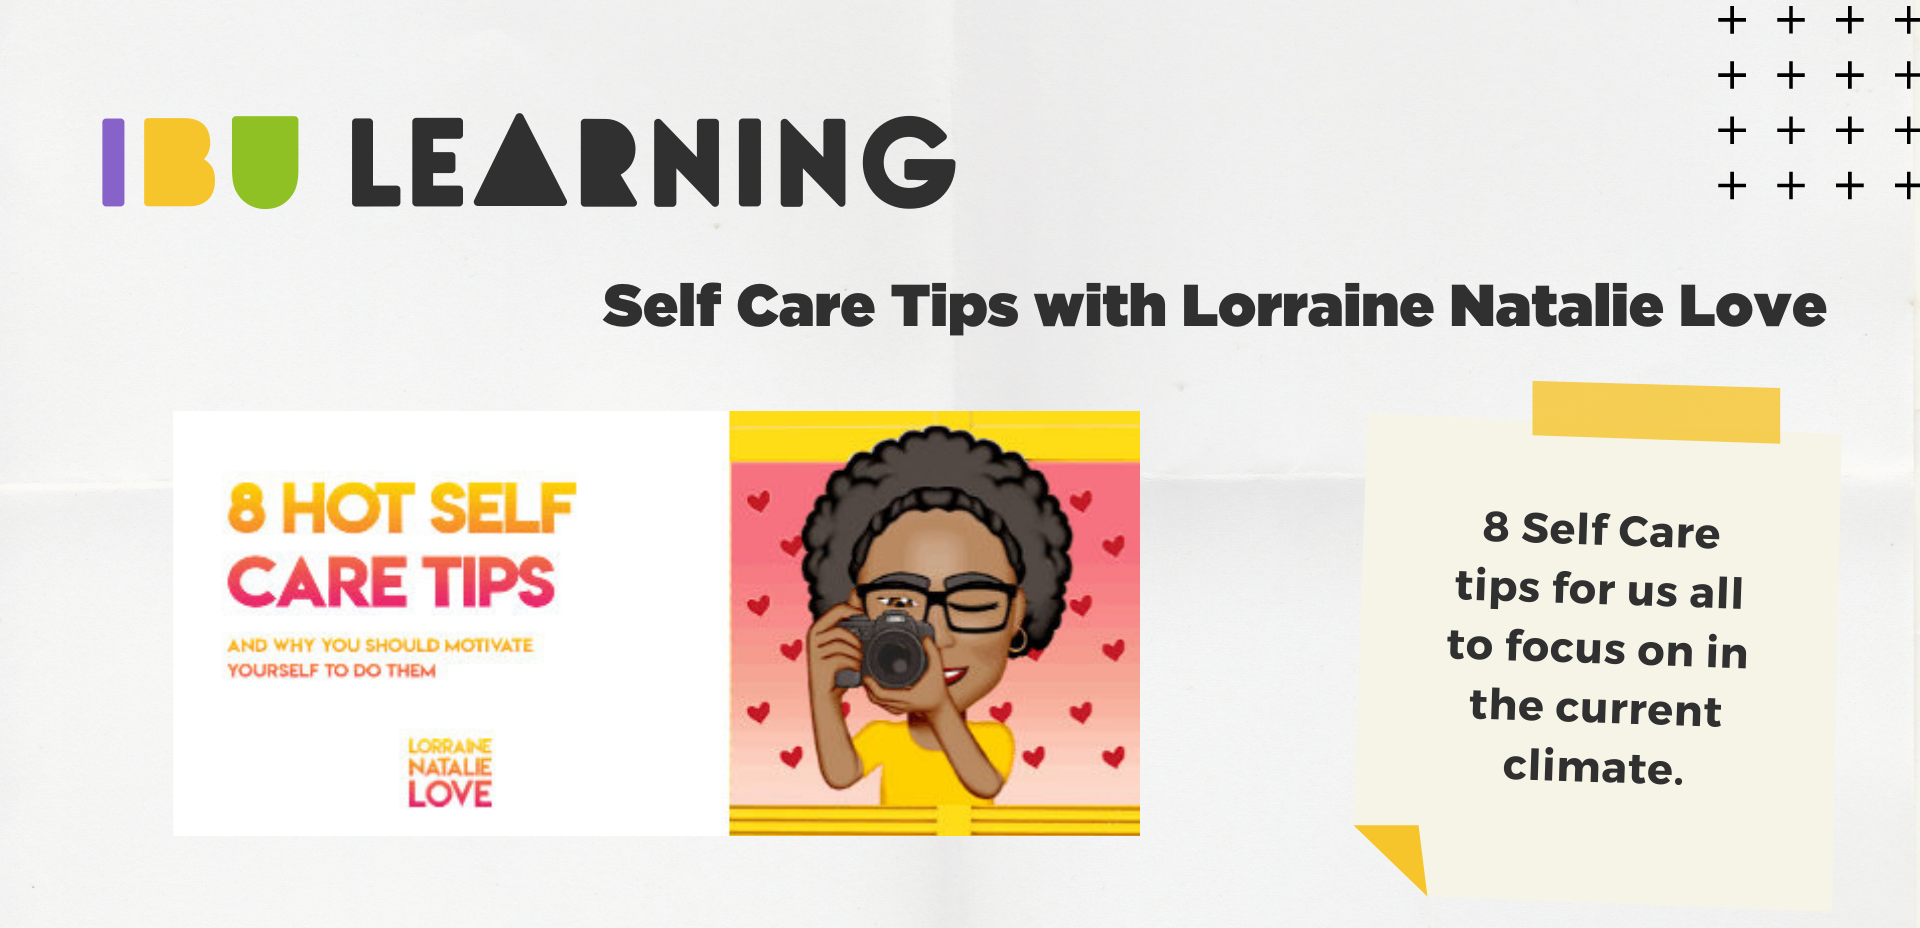 IBU Learning - 8 Hot Self Care Tips with Lorraine Natalie Love